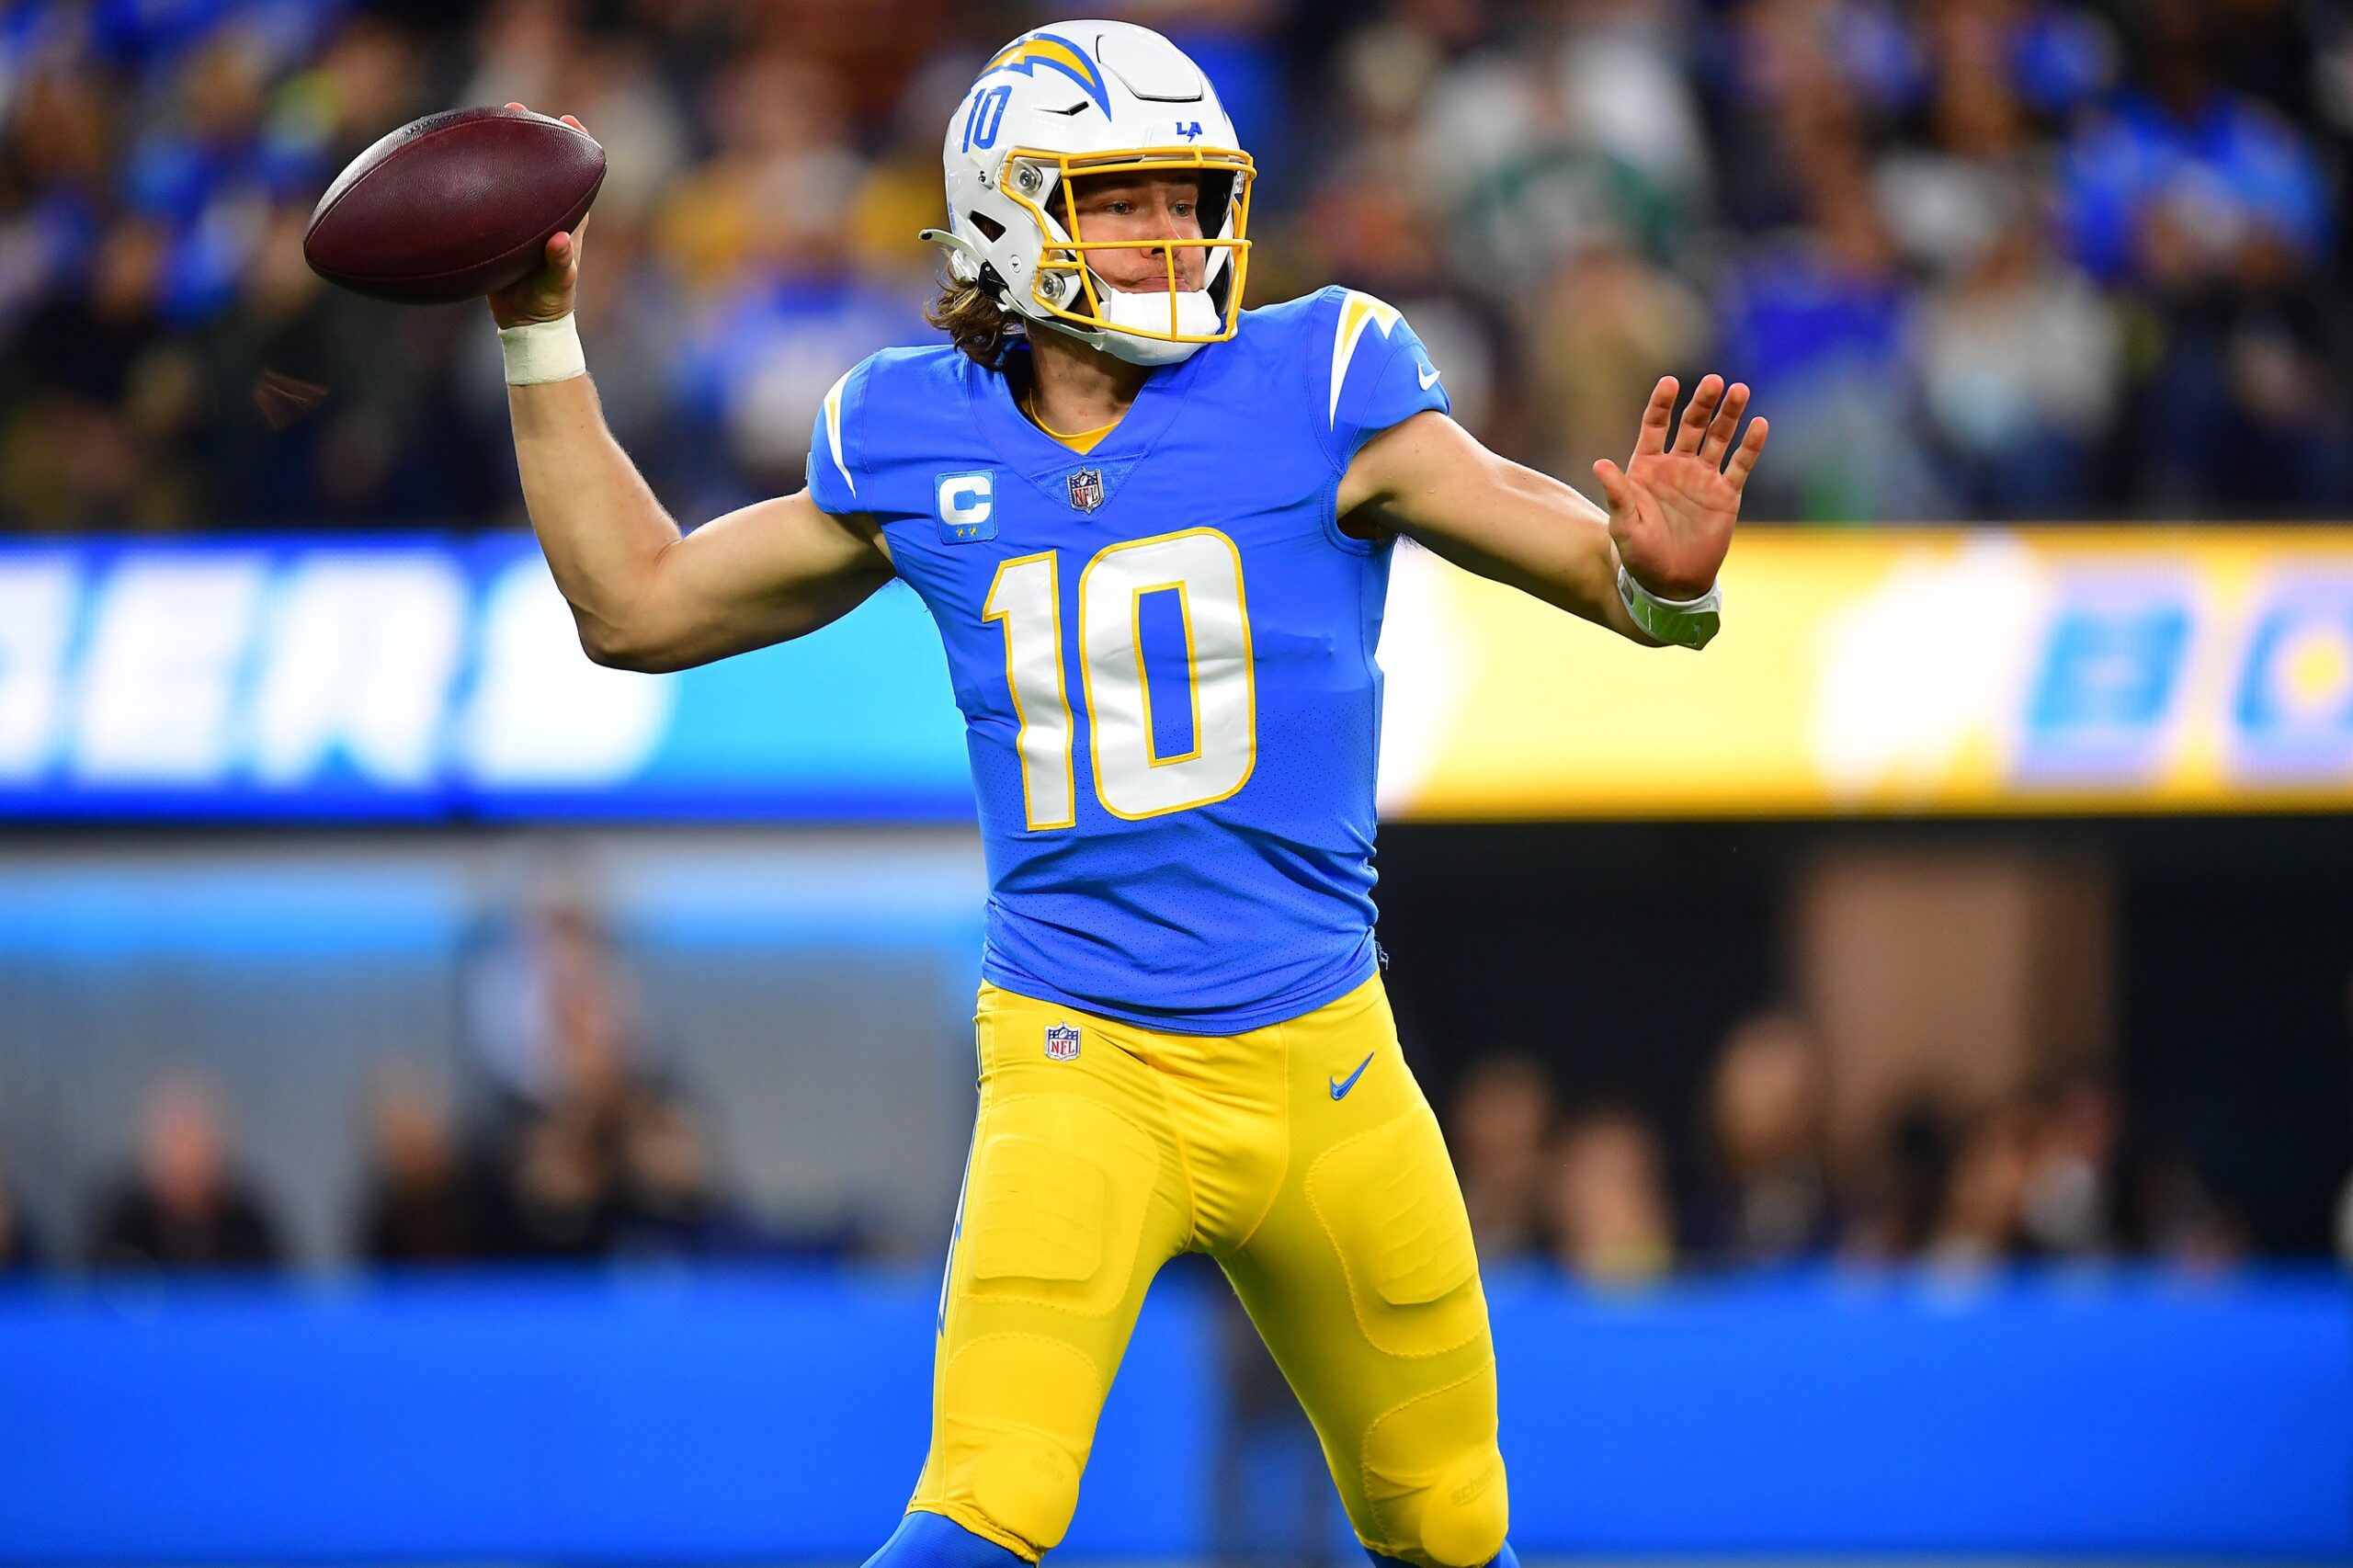 Week 16 NFL game picks: Chargers keep Colts reeling on Monday night